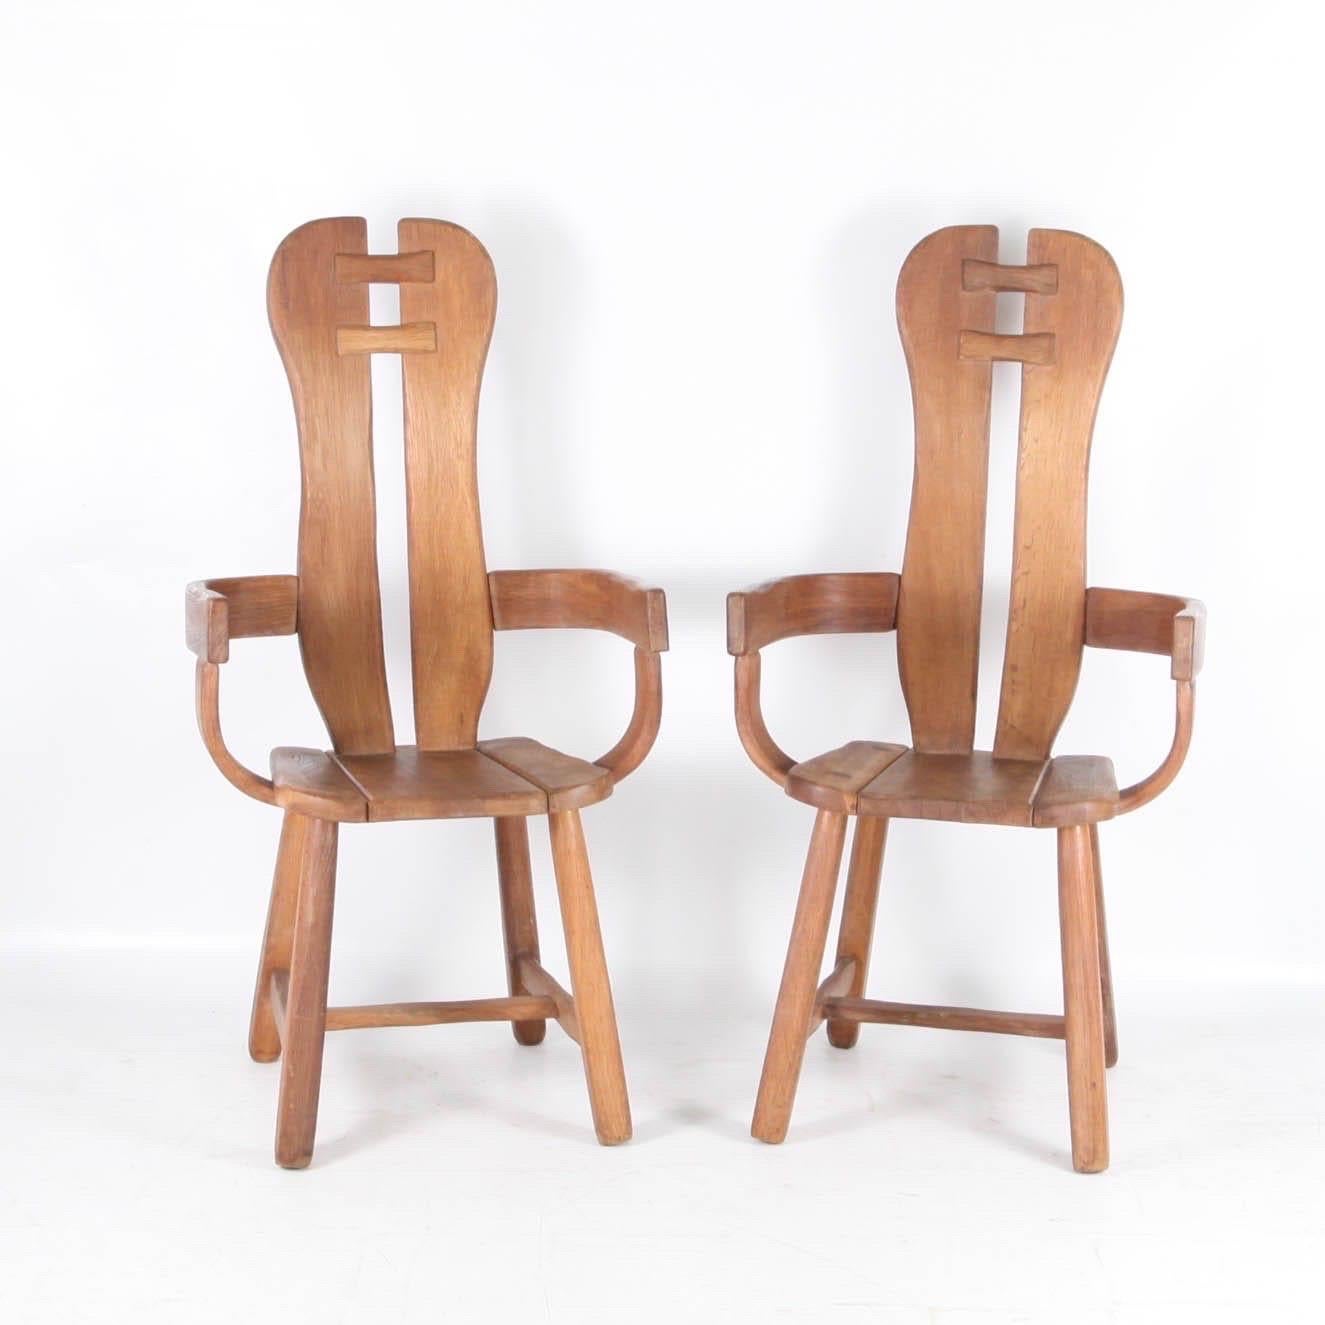 Set of 12 chairs by DE PUYDT In Excellent Condition For Sale In Isle Sur Sorgue, FR